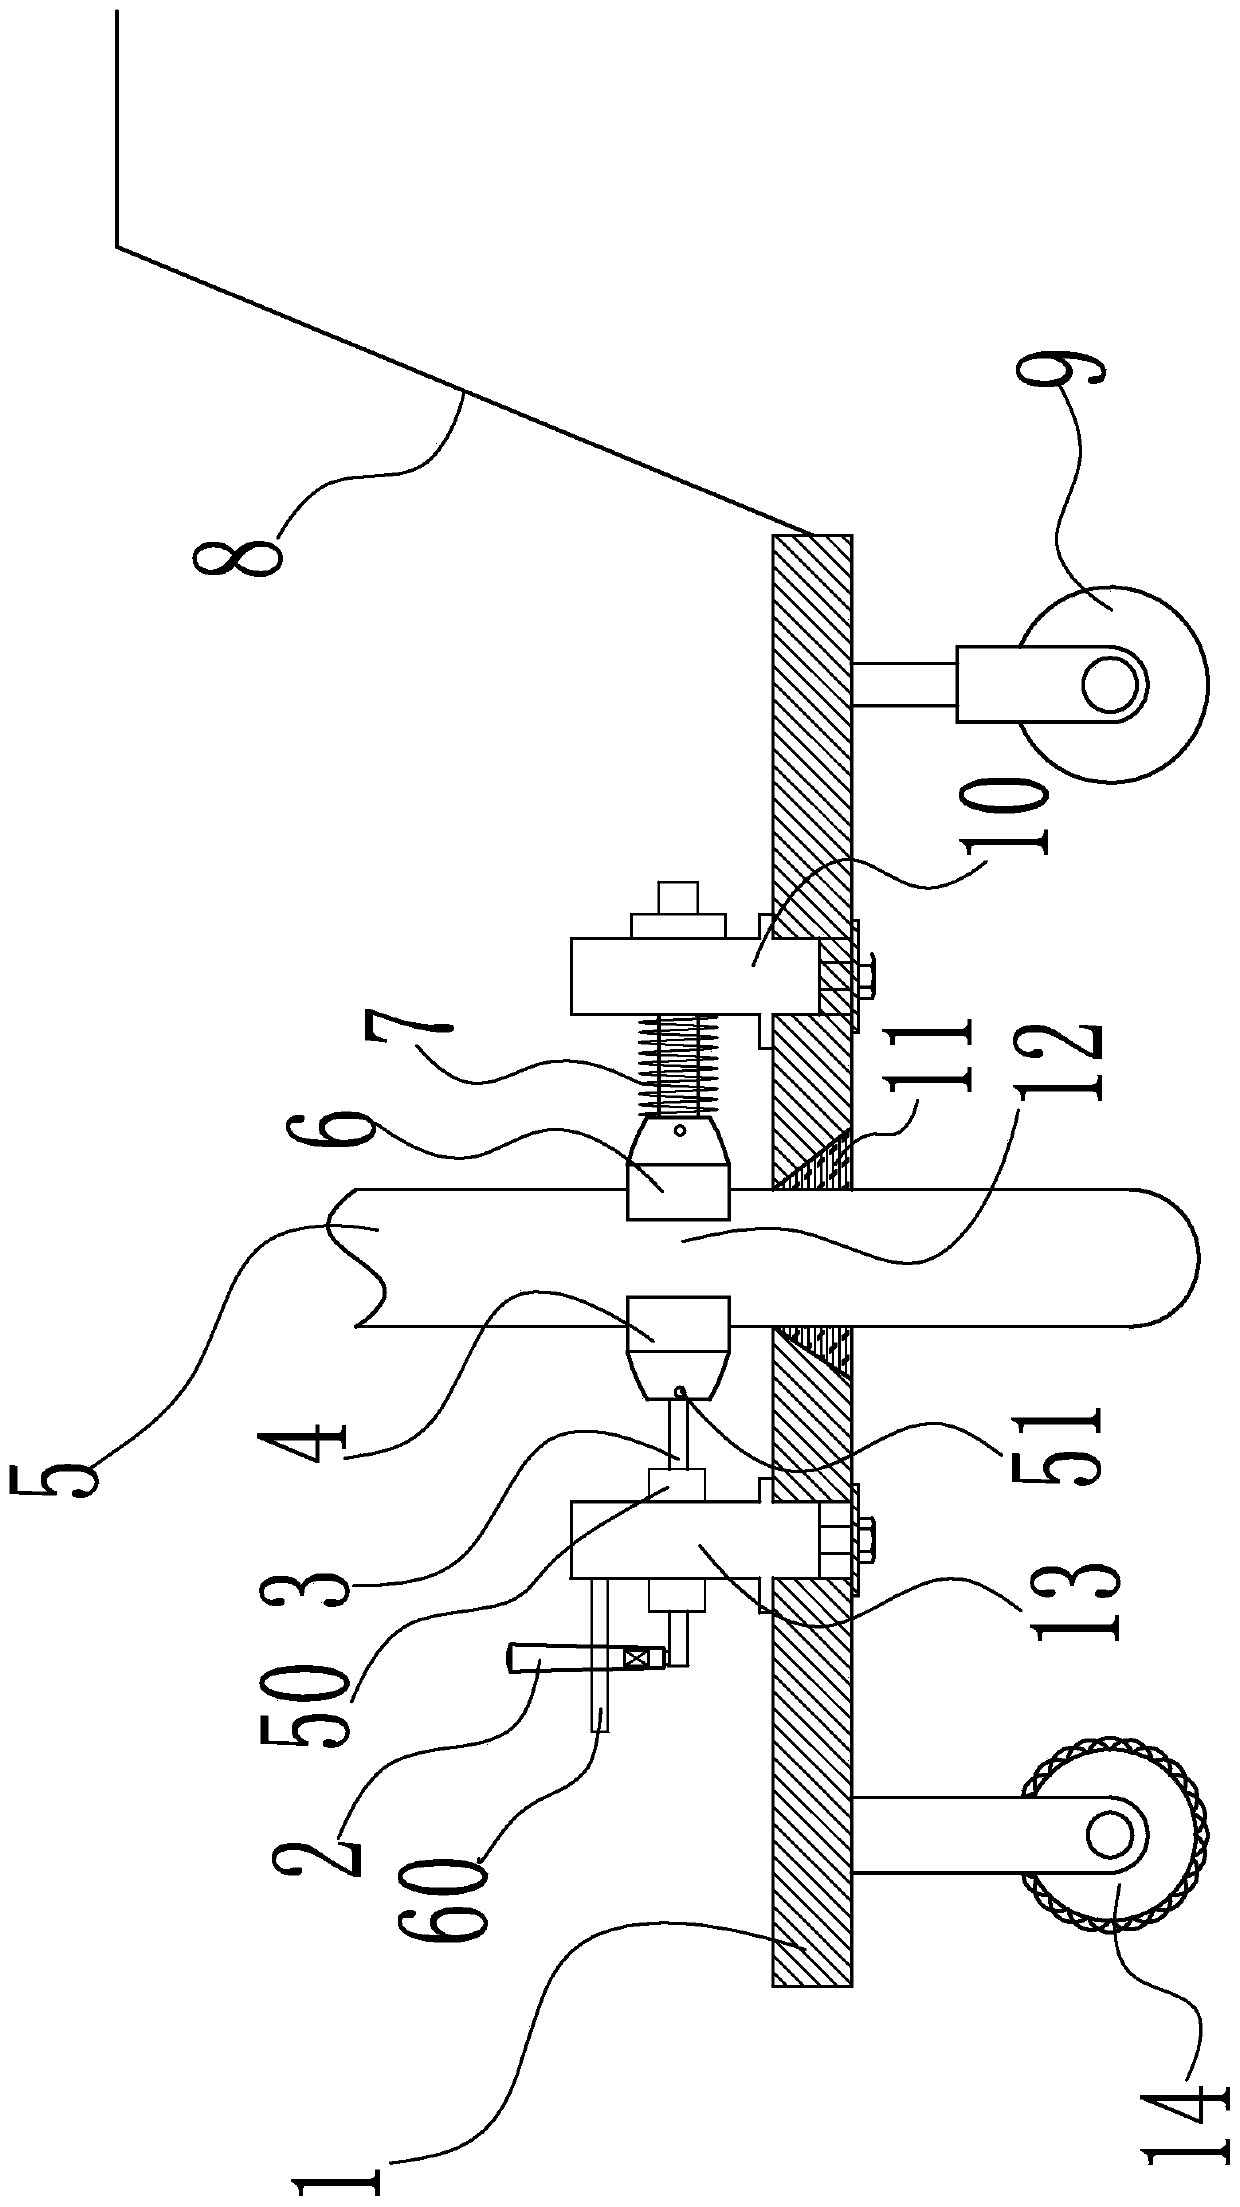 Concrete vibrating compaction device for municipal engineering construction